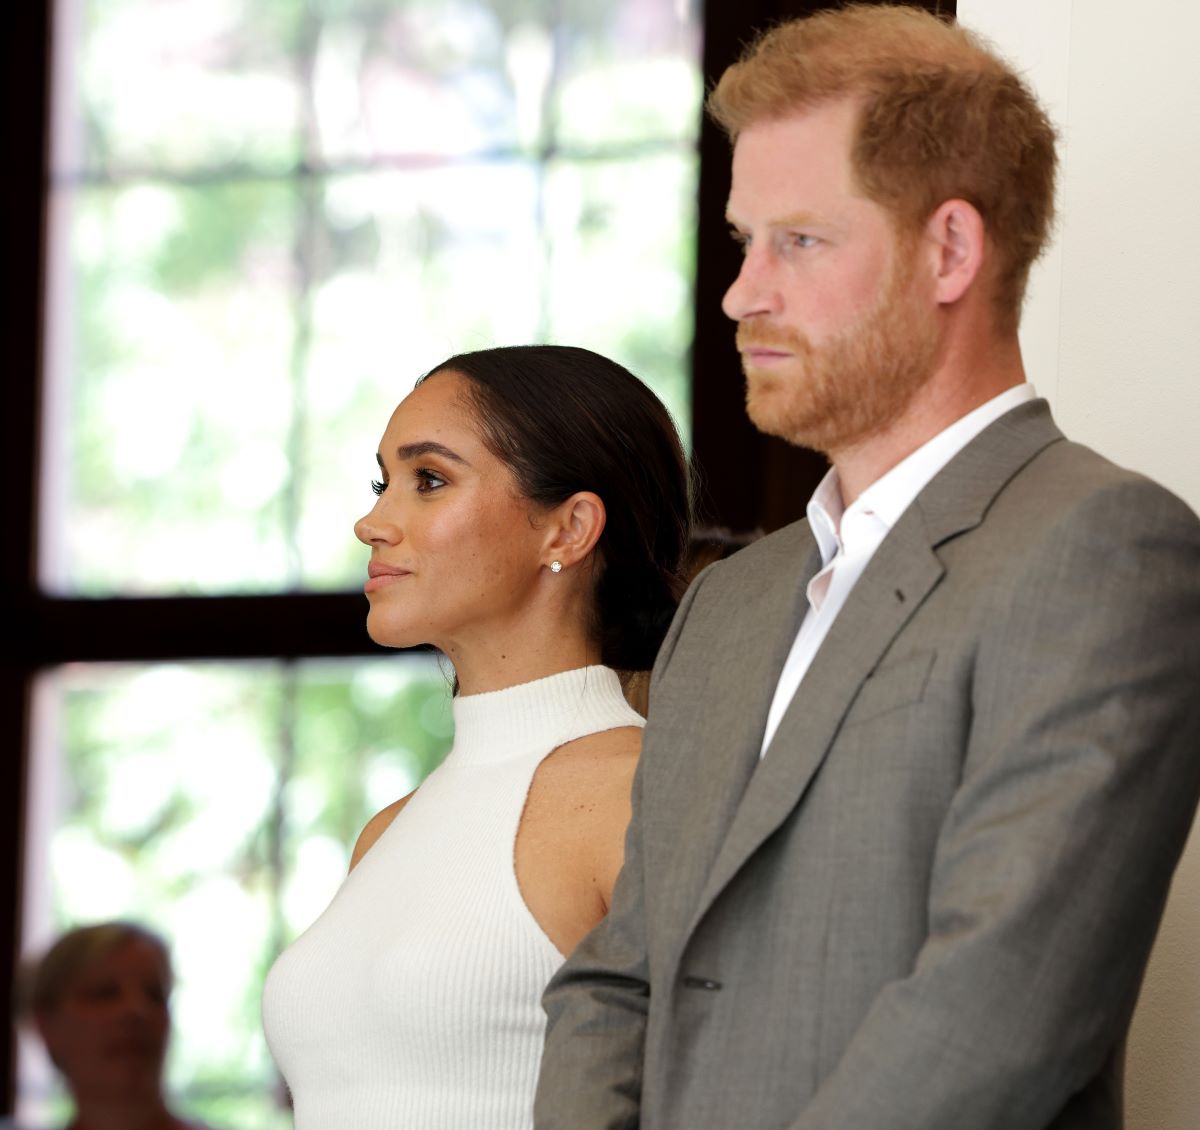 Meghan Markle and Prince Harry listen to speeches during the Invictus Games event in Dusseldorf, Germany